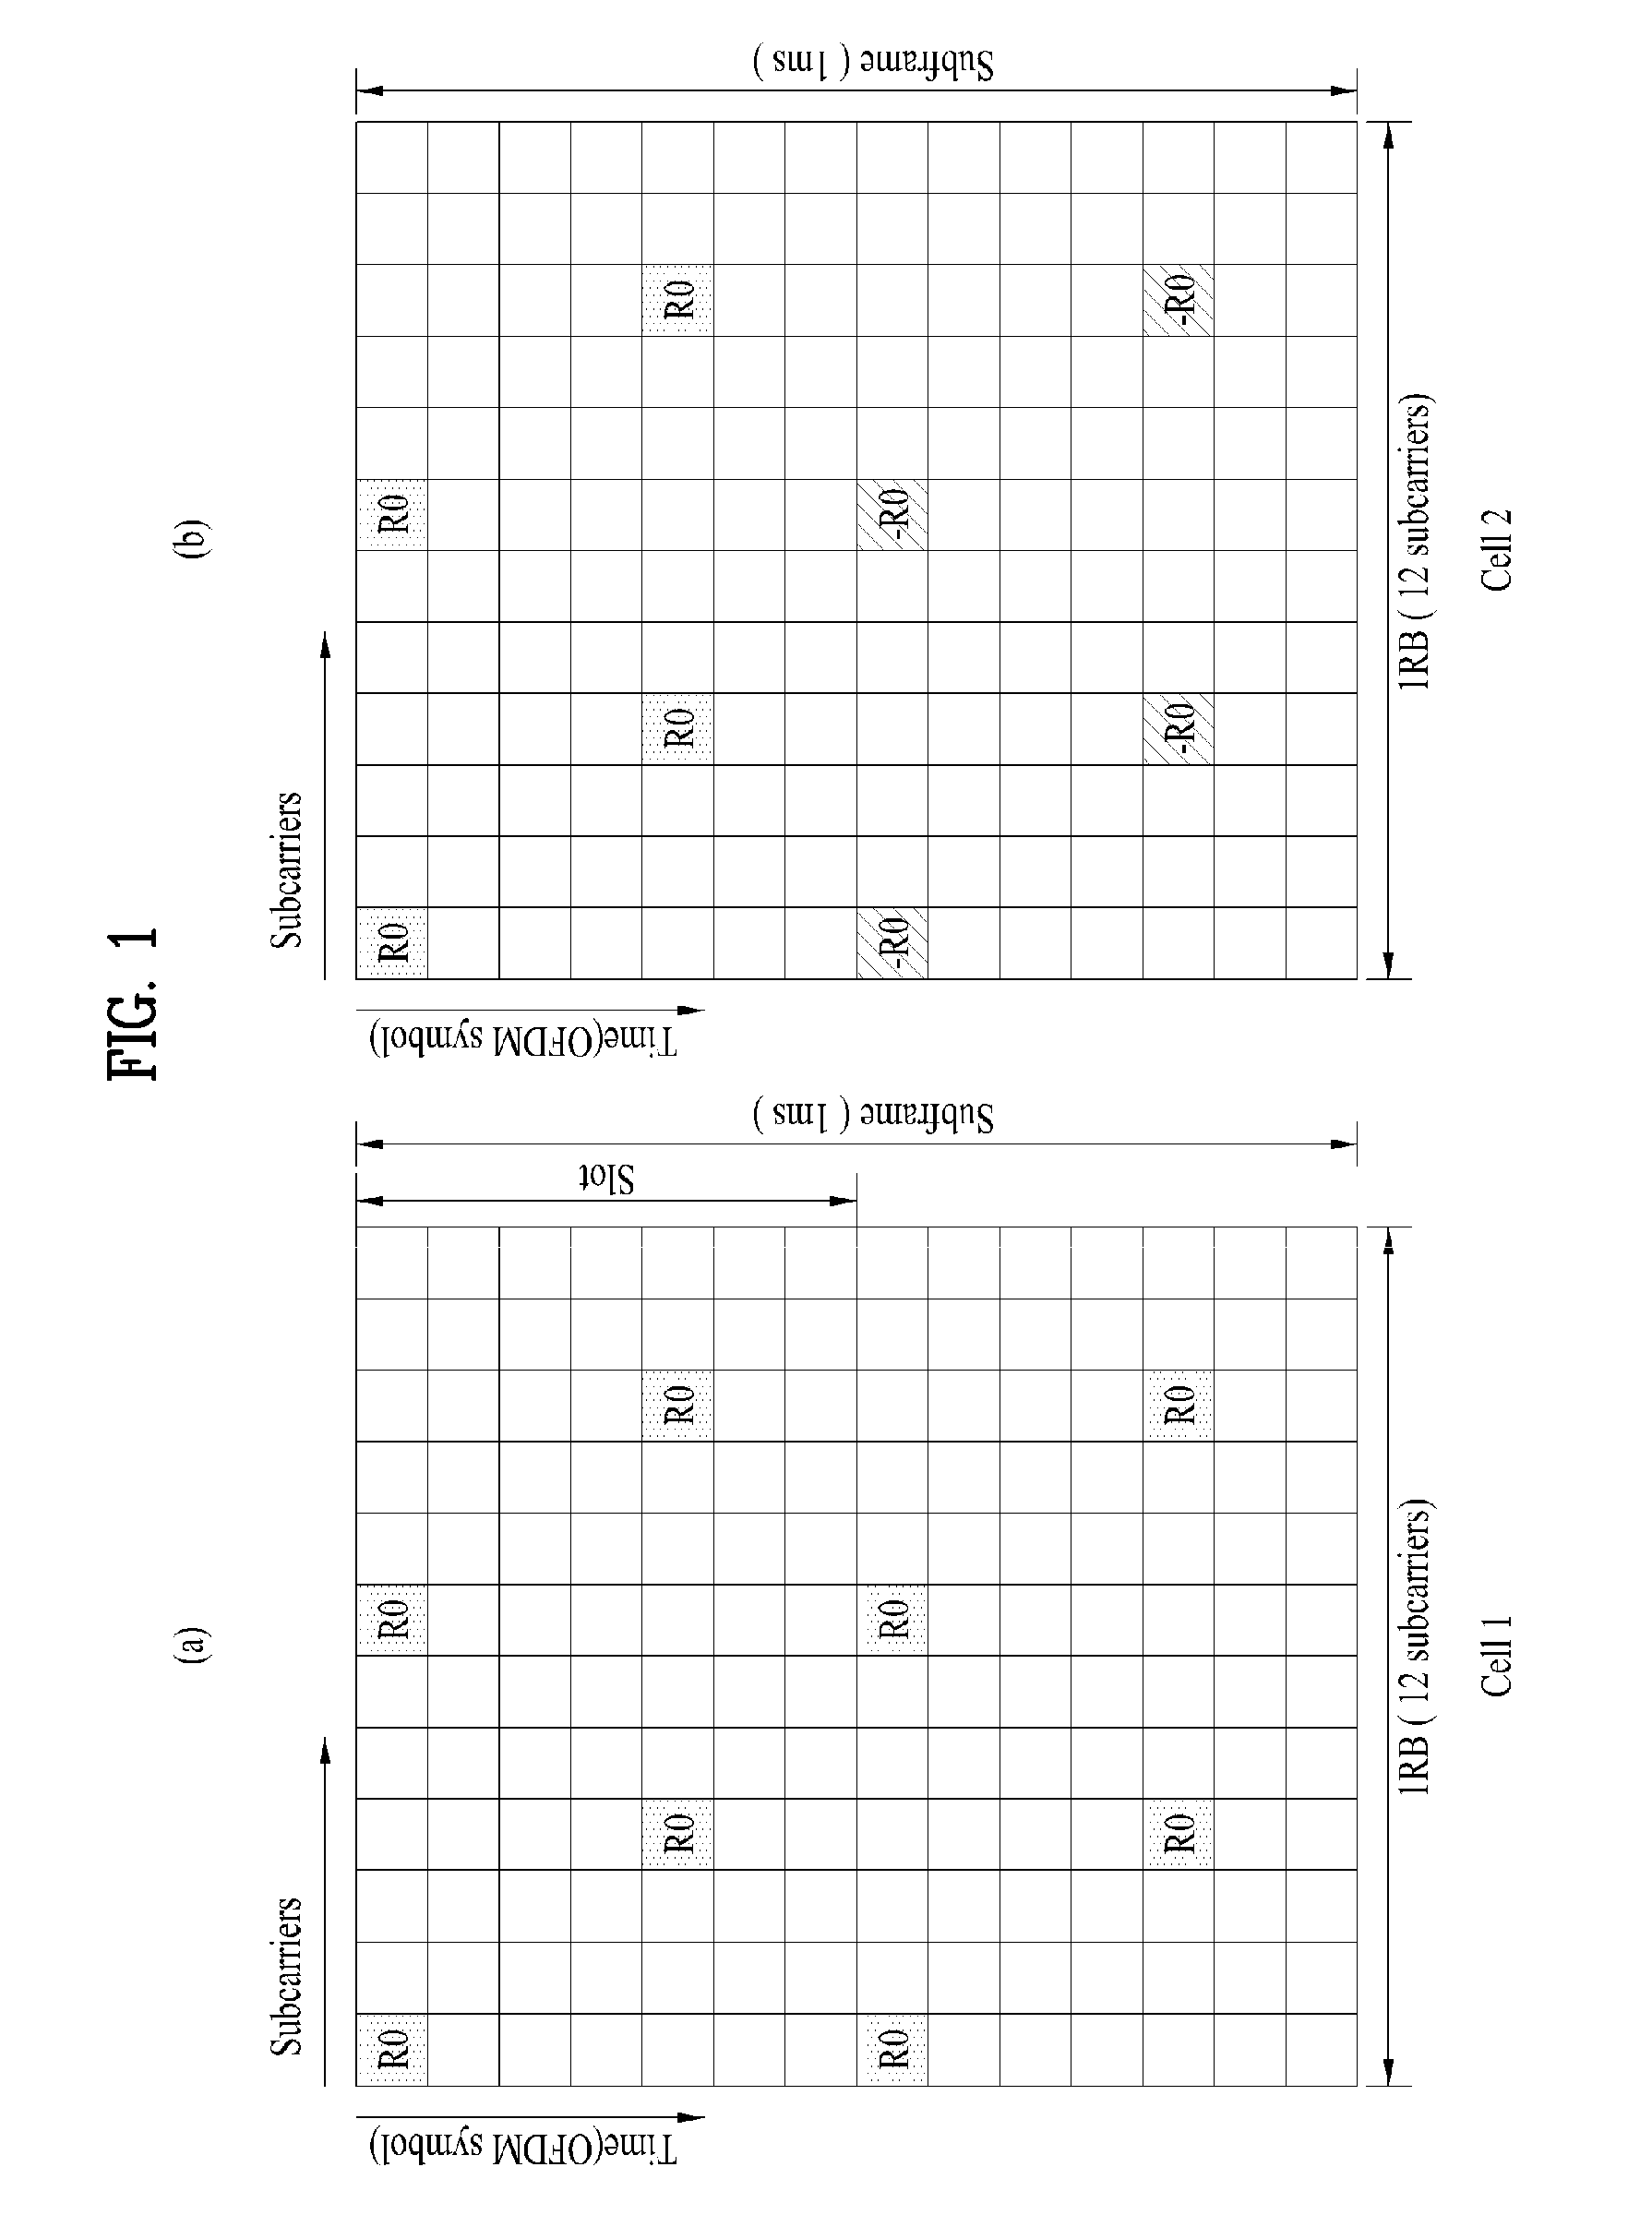 Method for transmitting and receiving a comp reference signal in a multi-cell environment